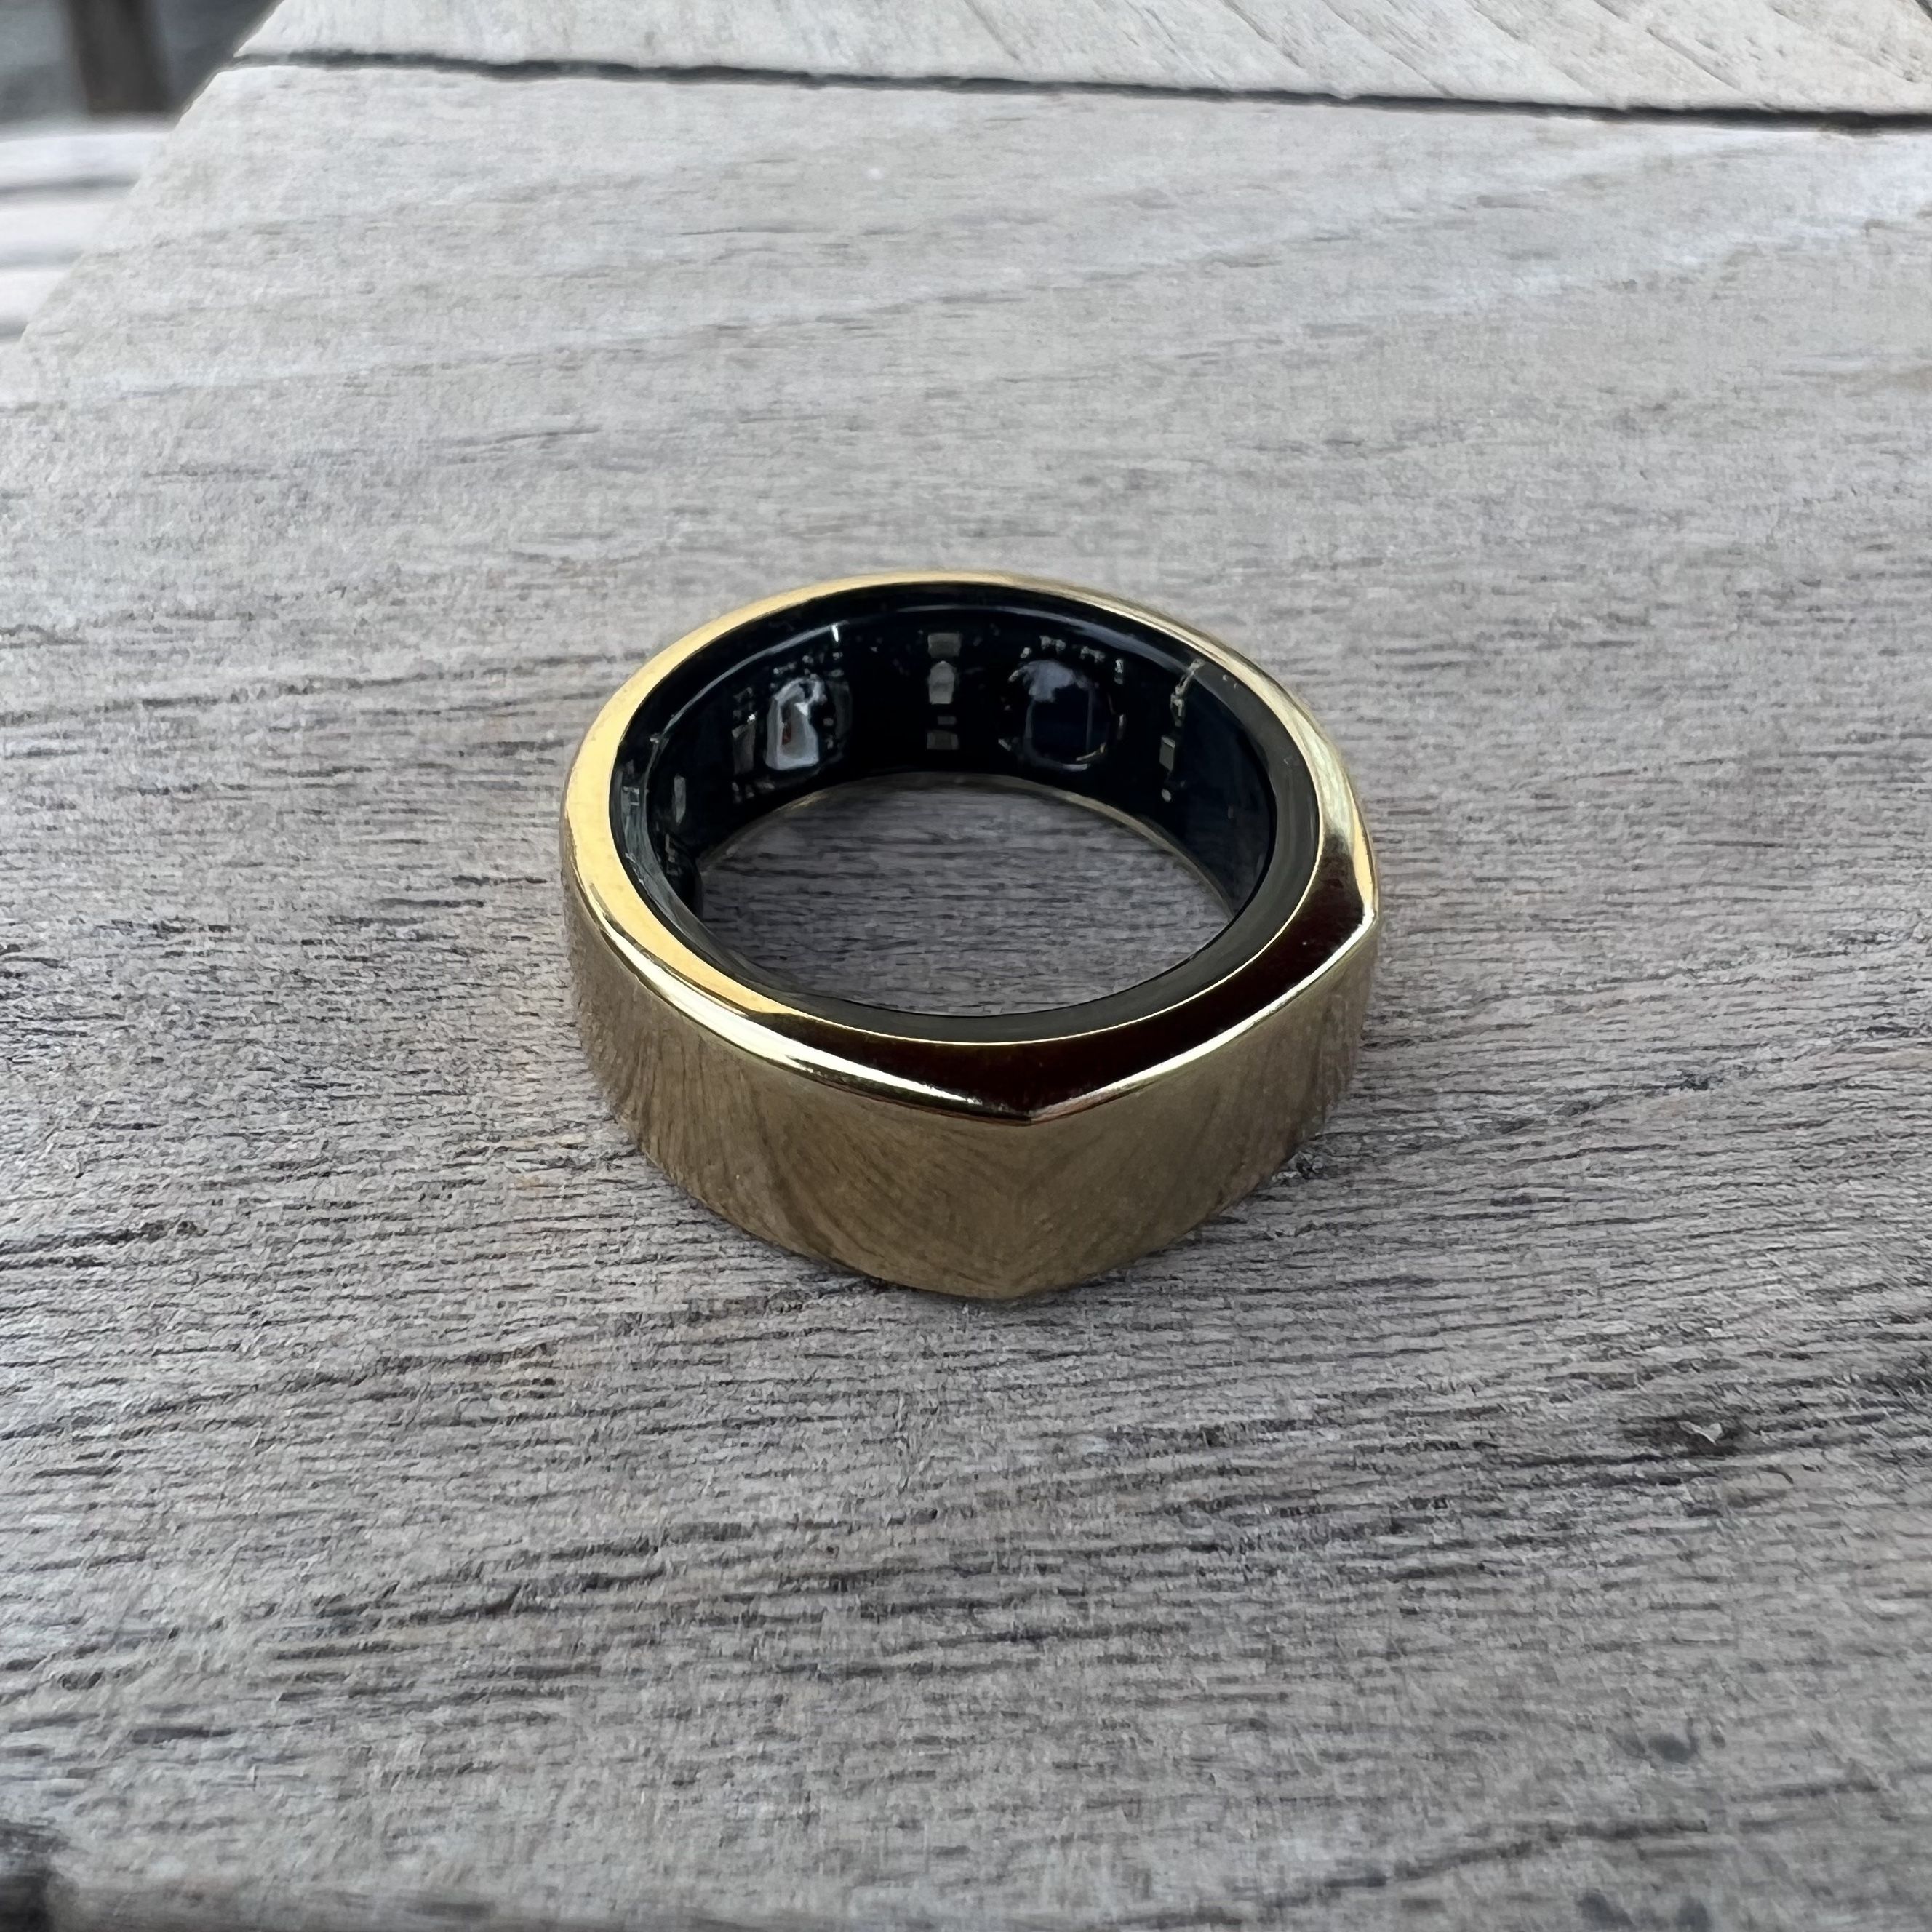 Oura Ring Review  I tried it for 30 days - here's what I found. 